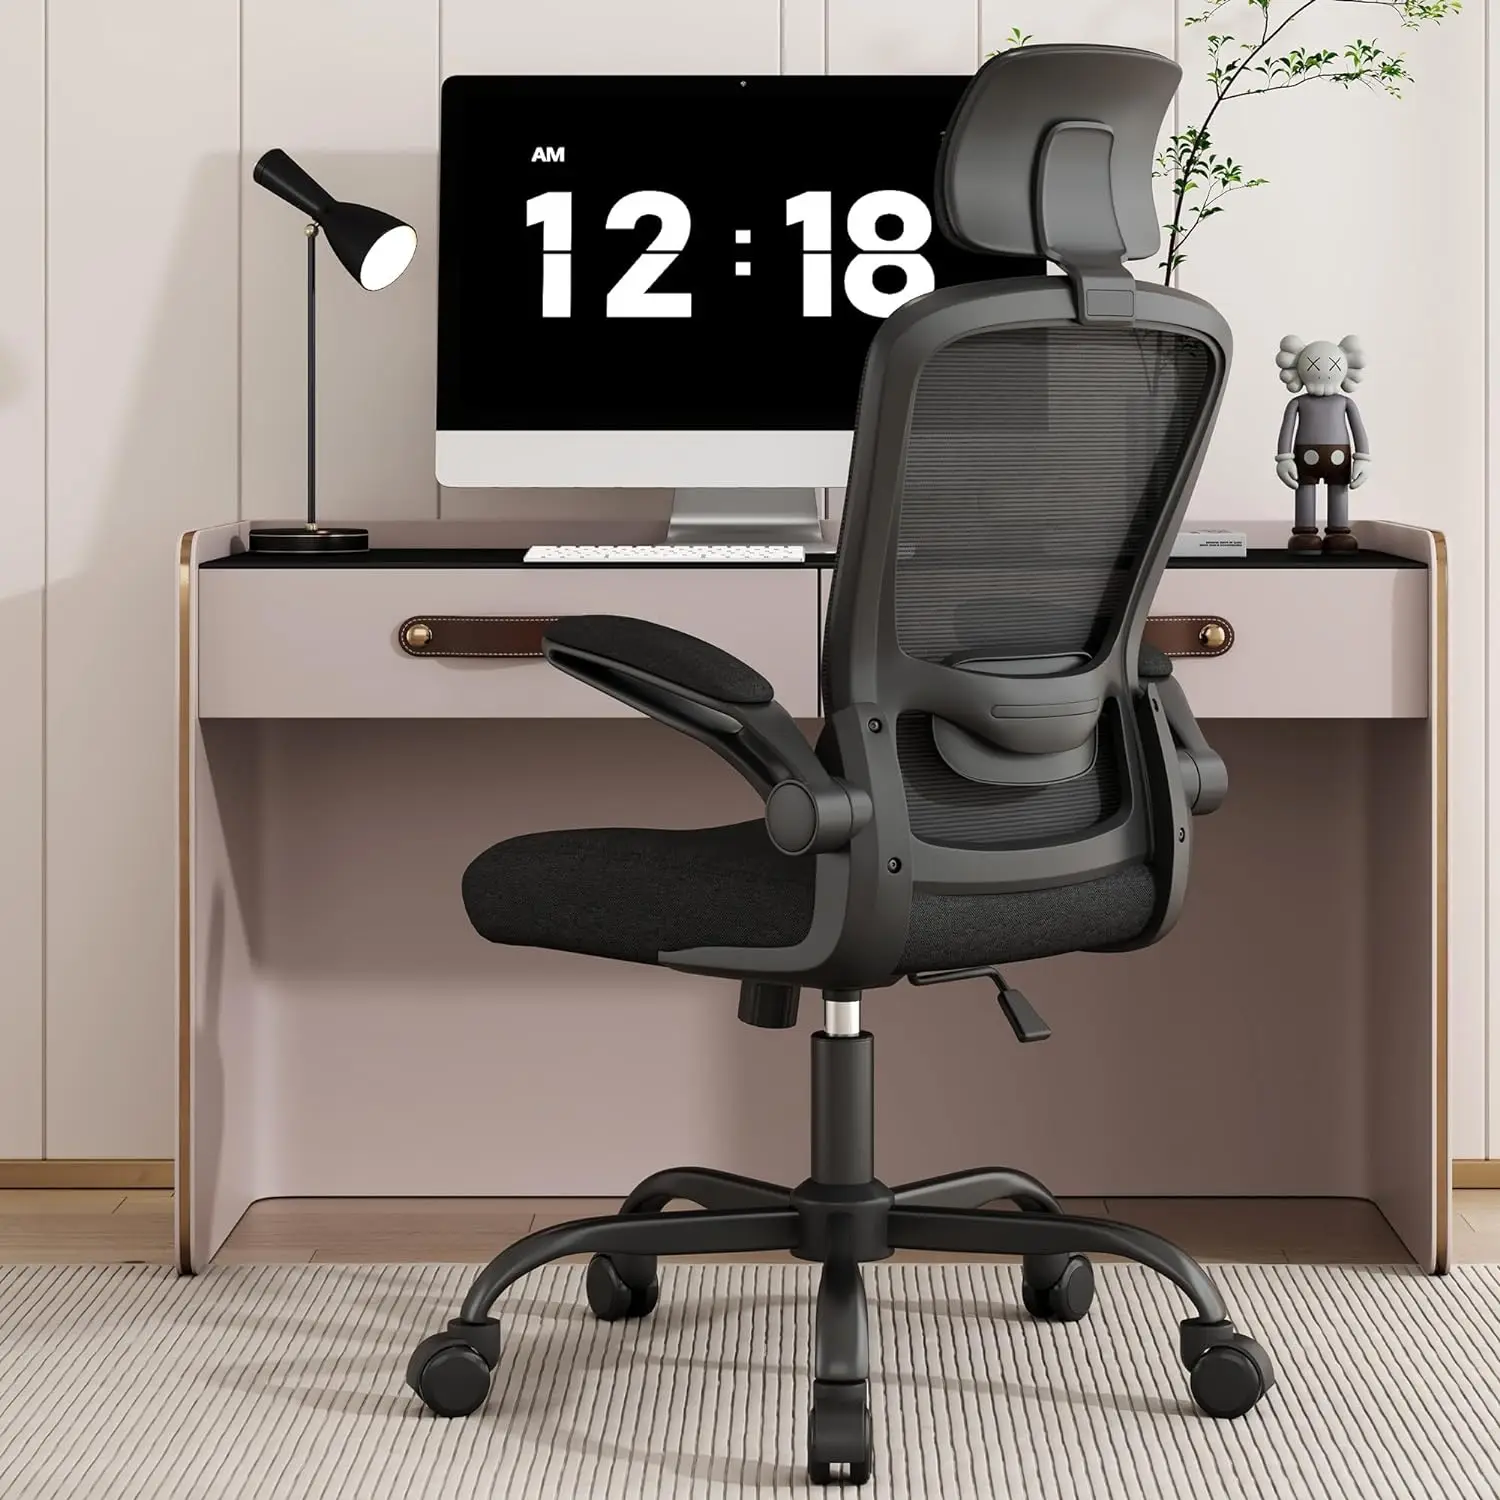 

Mimoglad Home Office Chair, Ergonomic Desk Chair with Adjustable Lumbar Support, High Back Computer Chair- Adjustable Headrest